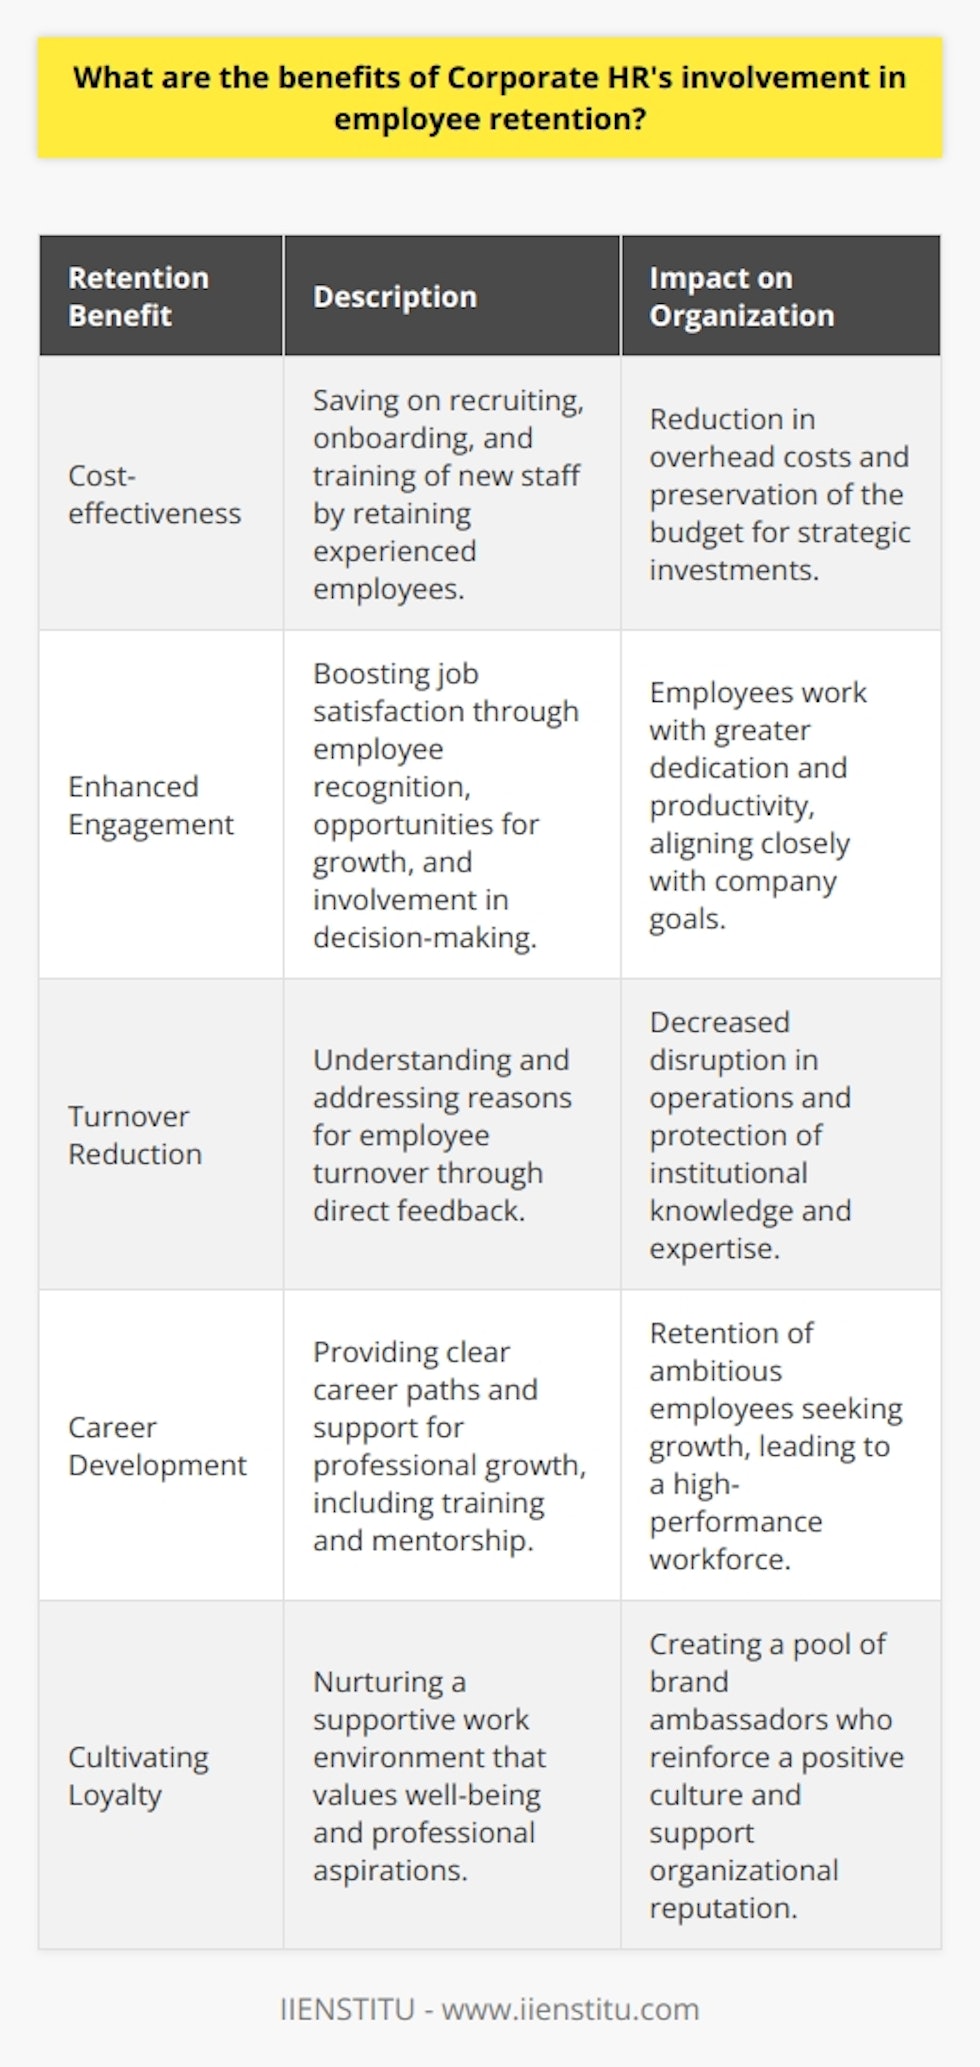 Corporate HR's involvement in employee retention is a pivotal aspect of organizational success. The retention of skilled employees is not only cost-effective compared to the price of recruiting and training new personnel but also aids in maintaining a consistent work environment and preserving institutional knowledge.One of the most direct benefits of HR-led retention strategies is the enhancement of employee engagement and job satisfaction. By recognizing the contributions of employees, offering career development opportunities, and ensuring their voices are heard, HR departments help to cultivate a sense of value and belonging among staff. Engaged employees have a stronger connection to the company's goals, work harder, and are less likely to leave.Moreover, Corporate HR can reduce turnover by identifying the driving factors behind employees' decisions to stay or leave. HR professionals can use exit interviews, surveys, and one-on-one discussions to gather feedback and adapt workplace practices accordingly. This proactive approach not only mitigates the costs associated with turnover, such as recruitment, onboarding, and training, but also helps retain the valuable tacit knowledge that employees develop over time.A focus on continuous learning and development is another area where HR departments can make a substantial impact on retention. By creating clear pathways for career progression and providing access to training, mentorship, and upskilling programs, HR can foster a culture of growth that encourages employees to invest their future in the company. This not only improves individual and team performance but also reduces the likelihood of employees seeking development opportunities elsewhere.Finally, cultivating loyalty within the workforce is a consequential outcome of HR's retention efforts. Loyalty manifests when employees feel that their work environment is supportive and their employer genuinely cares about their well-being and professional aspirations. Loyal employees are more inclined to go above and beyond in their roles, actively contribute to a positive company culture, and serve as brand ambassadors for the organization.In conclusion, Corporate HR plays an integral role in employee retention, impacting everything from the bottom line to the dynamic of the workplace environment. Prioritizing retention initiatives can lead to enhanced employee engagement, reduced overhead costs related to turnover, a thriving culture of learning and development, and deep-rooted employee loyalty. Given the significant benefits, it is imperative that organizations strategically involve HR in efforts to retain talent, thereby ensuring sustained business success and a more satisfying workplace for everyone involved.